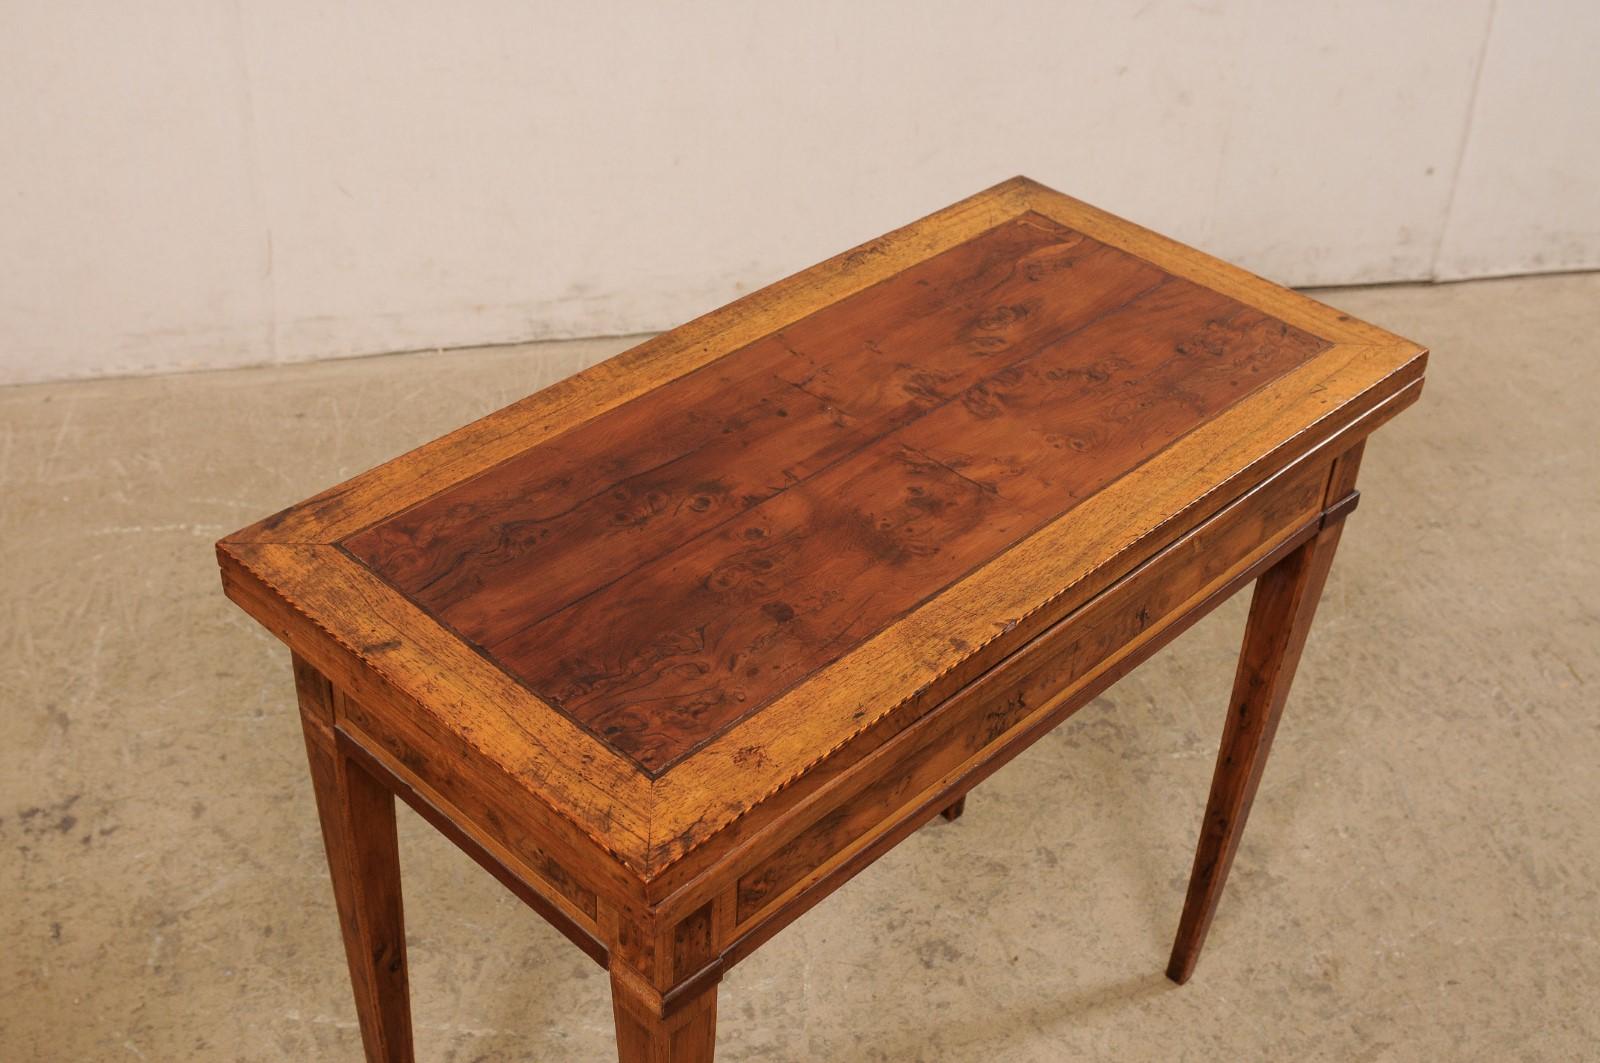 19th Century 19th C. French Petite-Size Flip Top Table 'Transitional to a Card/Games Table' For Sale